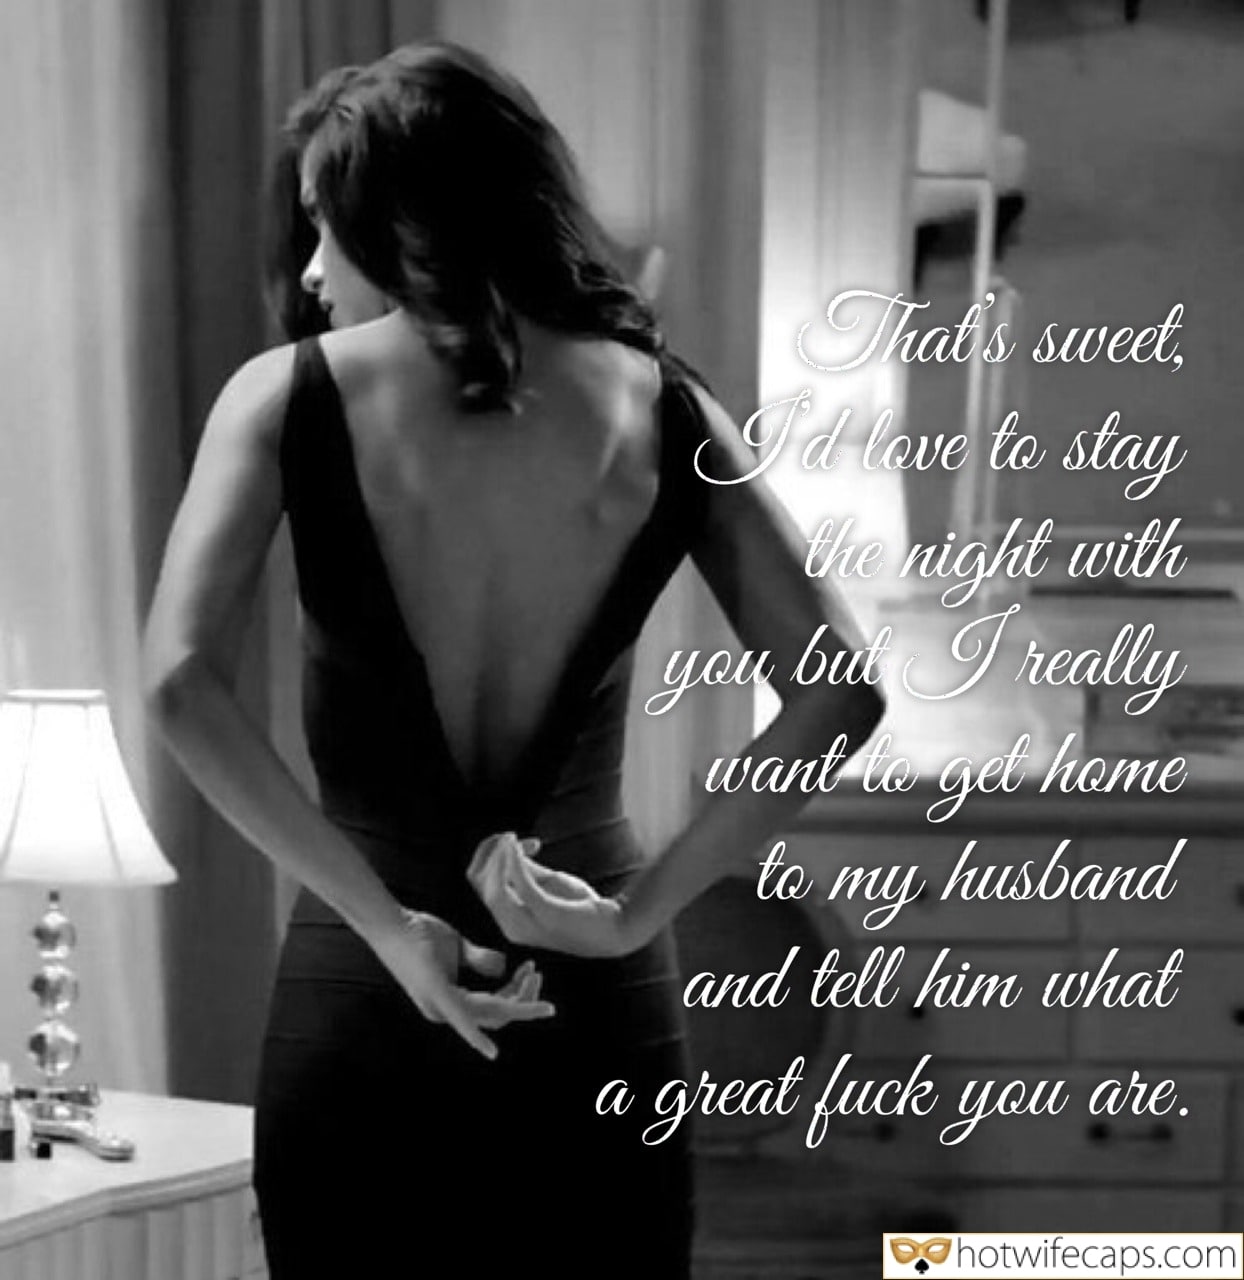 Sexy Memes Cuckold Cleanup Cheating Bully Bull Boss hotwife caption: That’s sweet I love to stay the night with you but I really want to get home to my my husband and tell him what a great fuck you are. Sexy Wife Stretches Black Dress